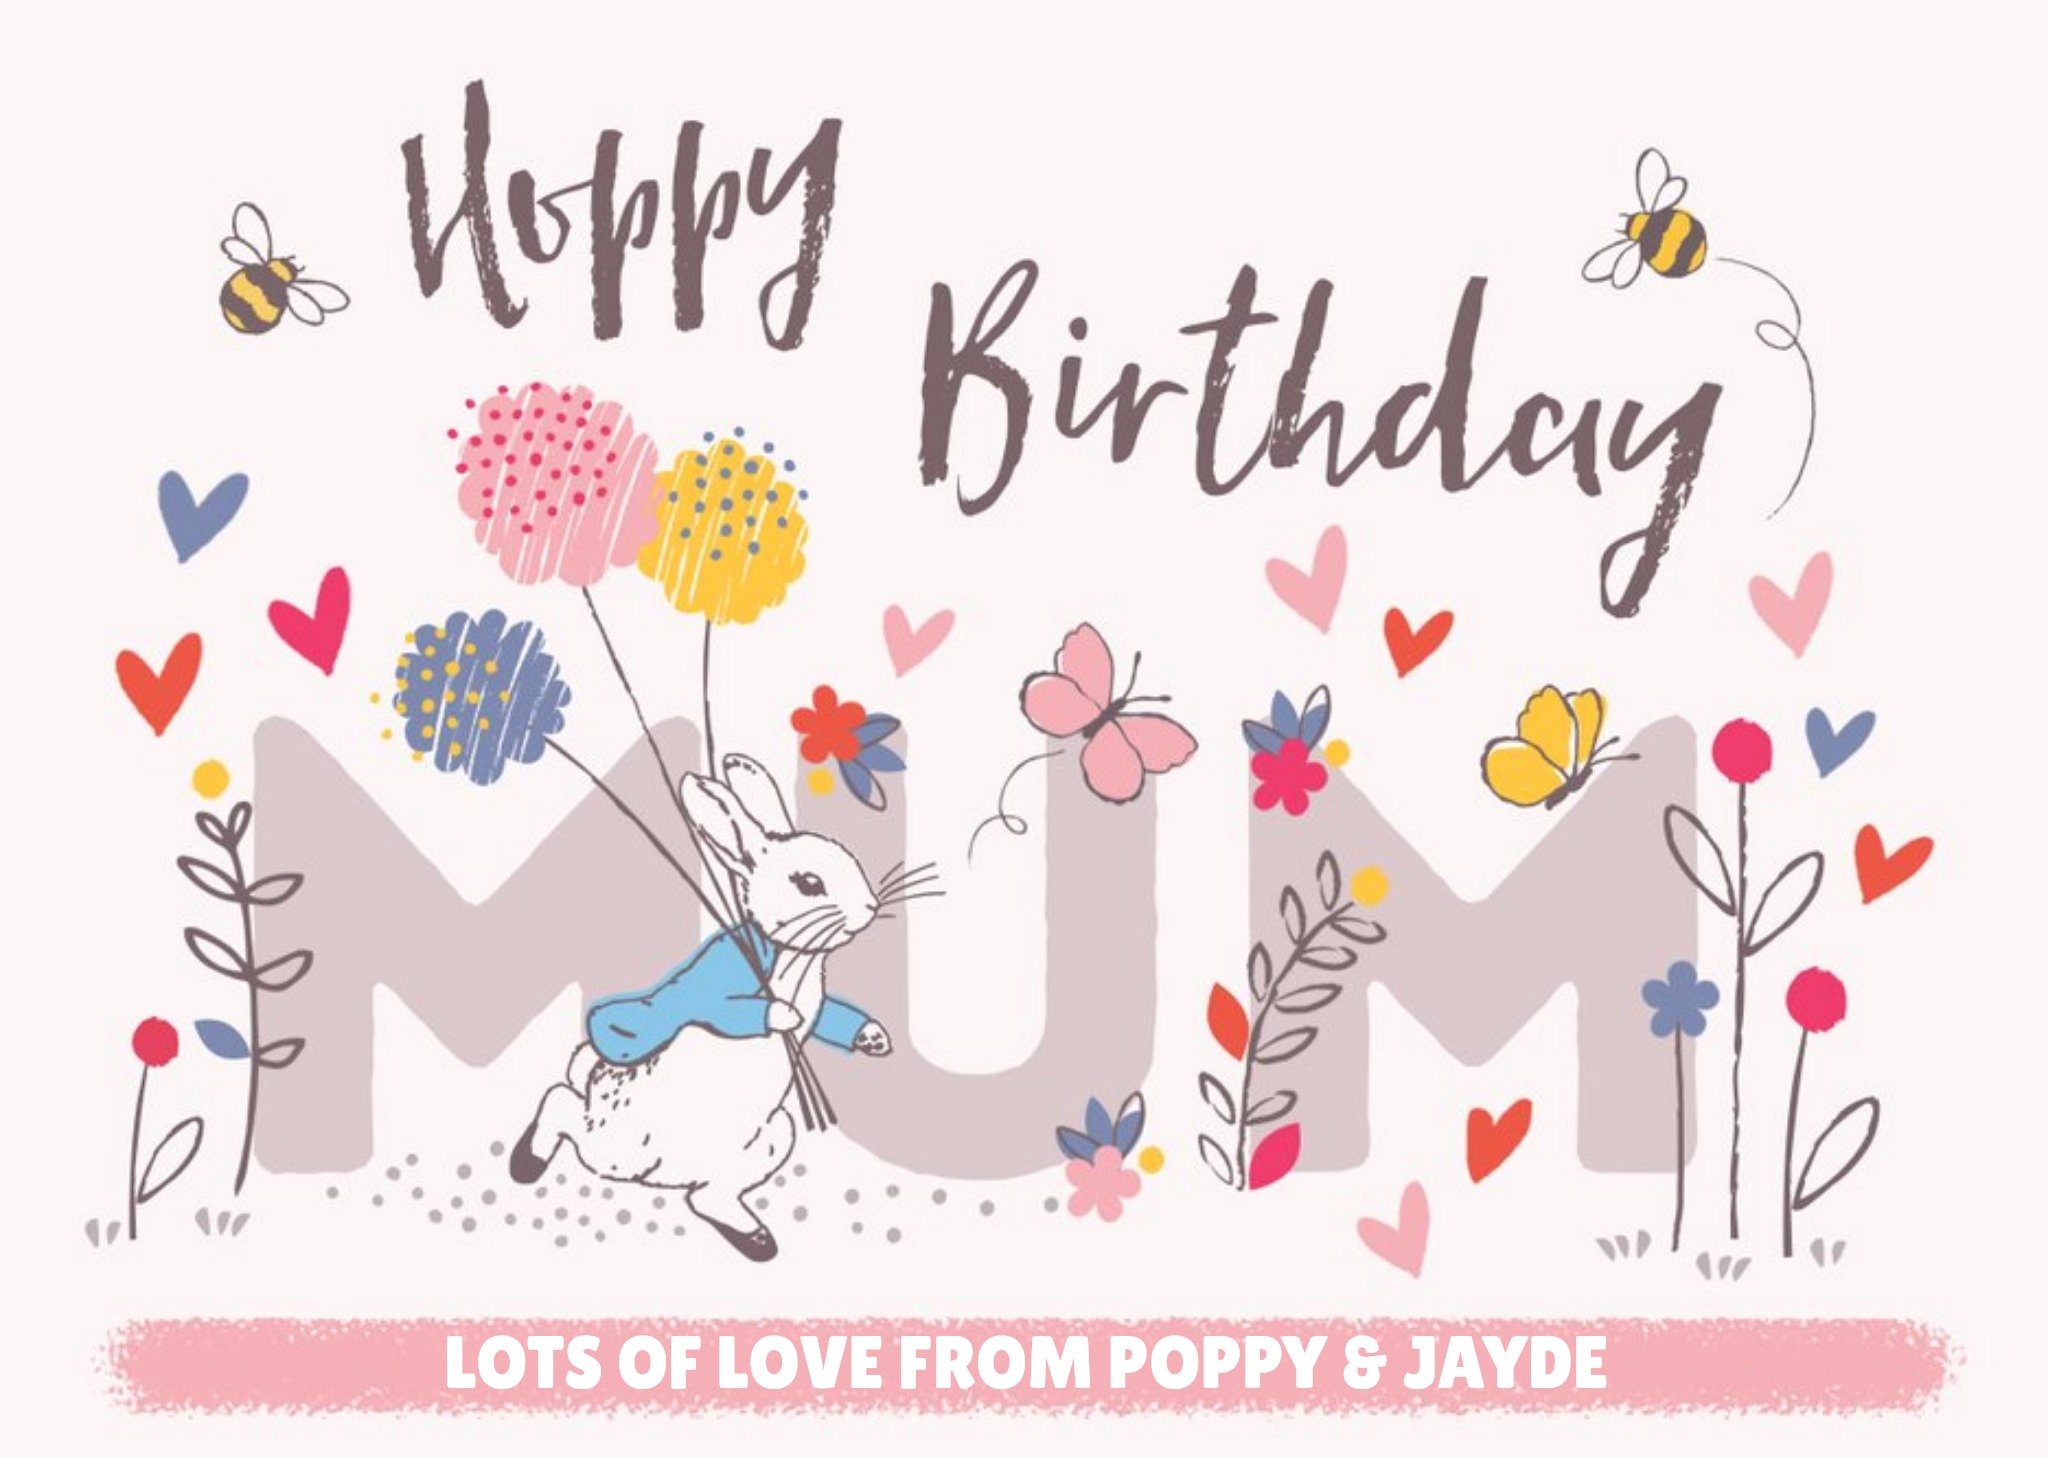 Peter Rabbit Birthday Card For Mum Lots Of Love, Large